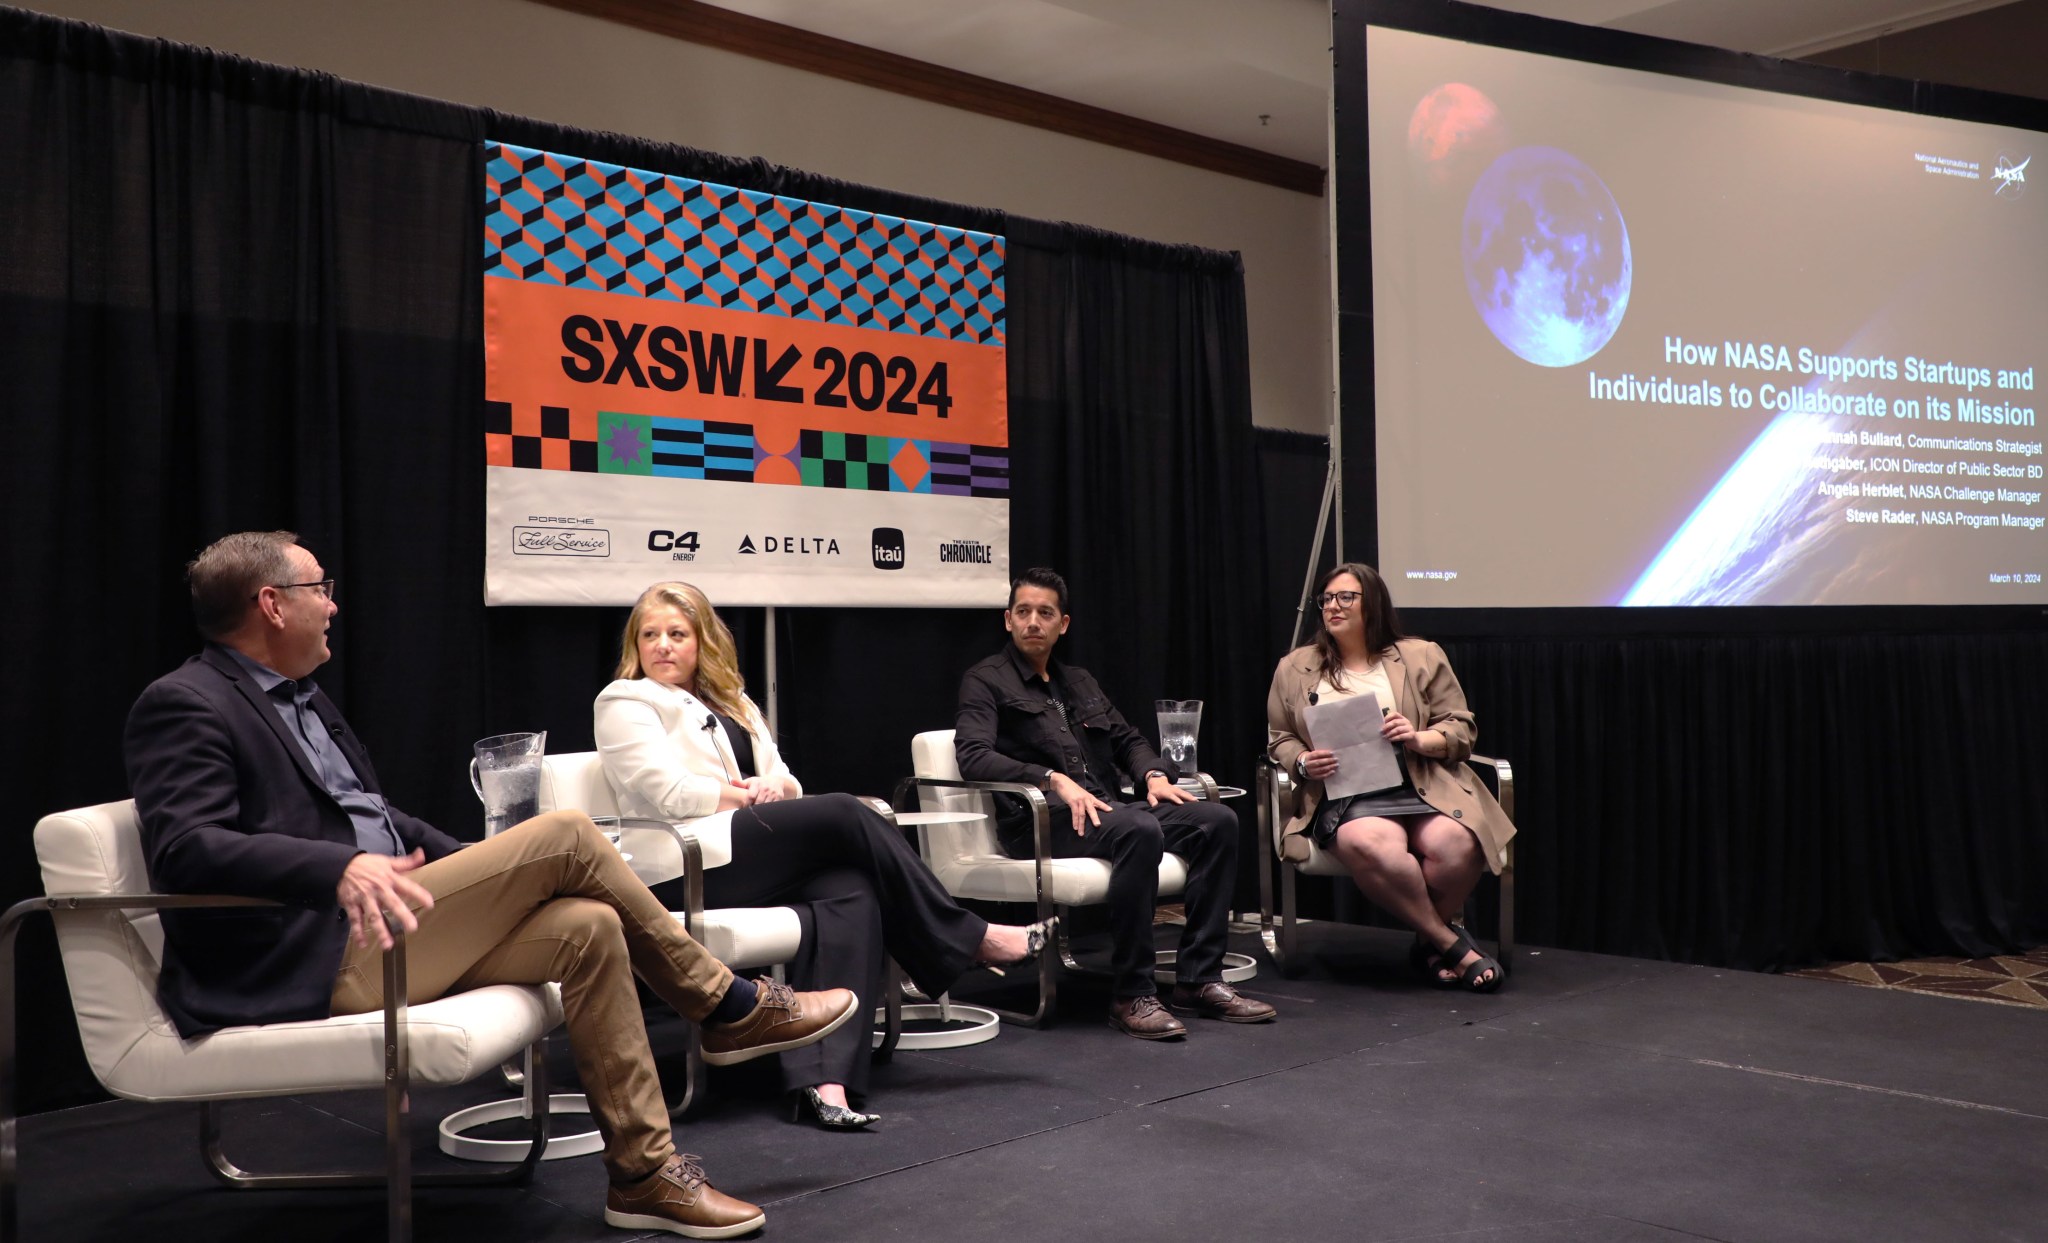 From left, panelists Steve Rader from NASA’s Johnson Space Center, Angela Herblet and Savannah Bullard from the agency’s Marshall Space Flight Center, and Andrew Rothgaber from ICON discuss the NASA’s Prizes, Challenges, and Crowdsourcing program at the South by Southwest Conference on March 10 in Austin, Texas.